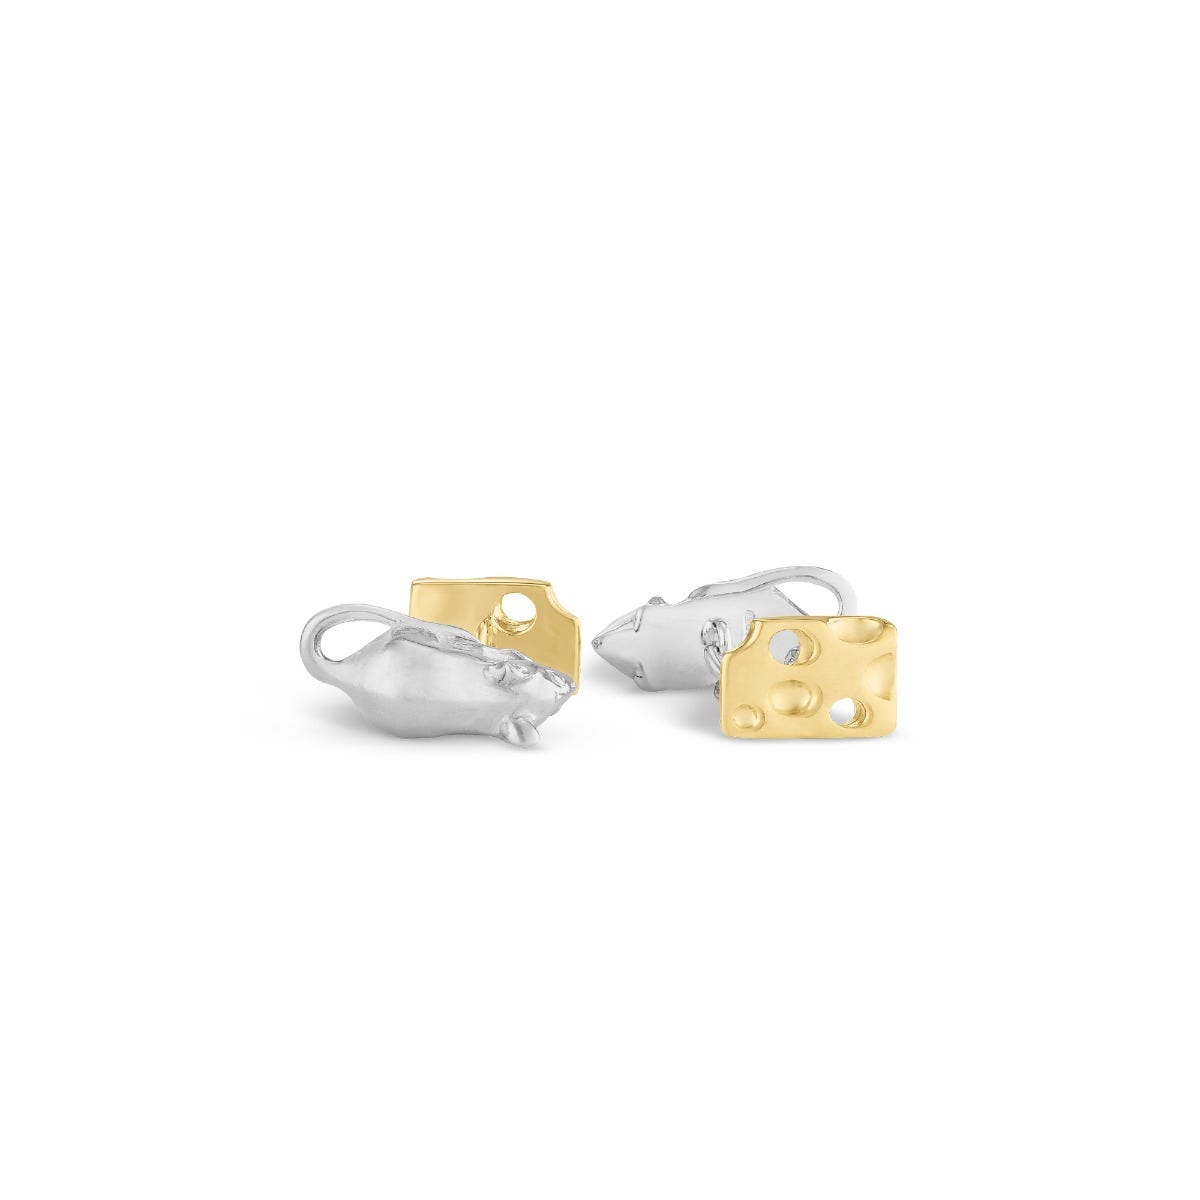 Mouse & Cheese Cufflinks in Sterling Silver